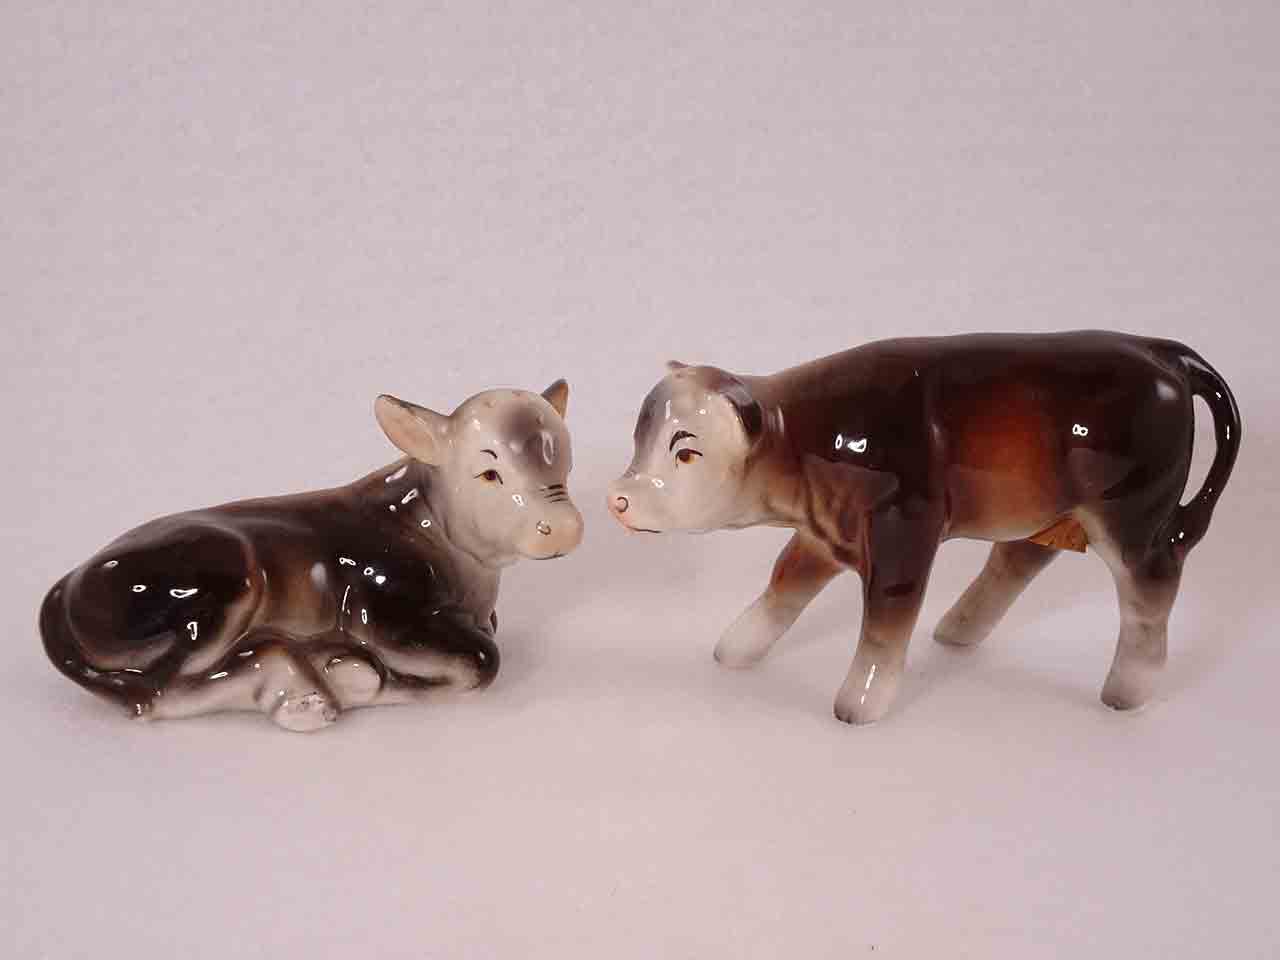 Realistic cows salt and pepper shakers by Victoria Ceramics Japan